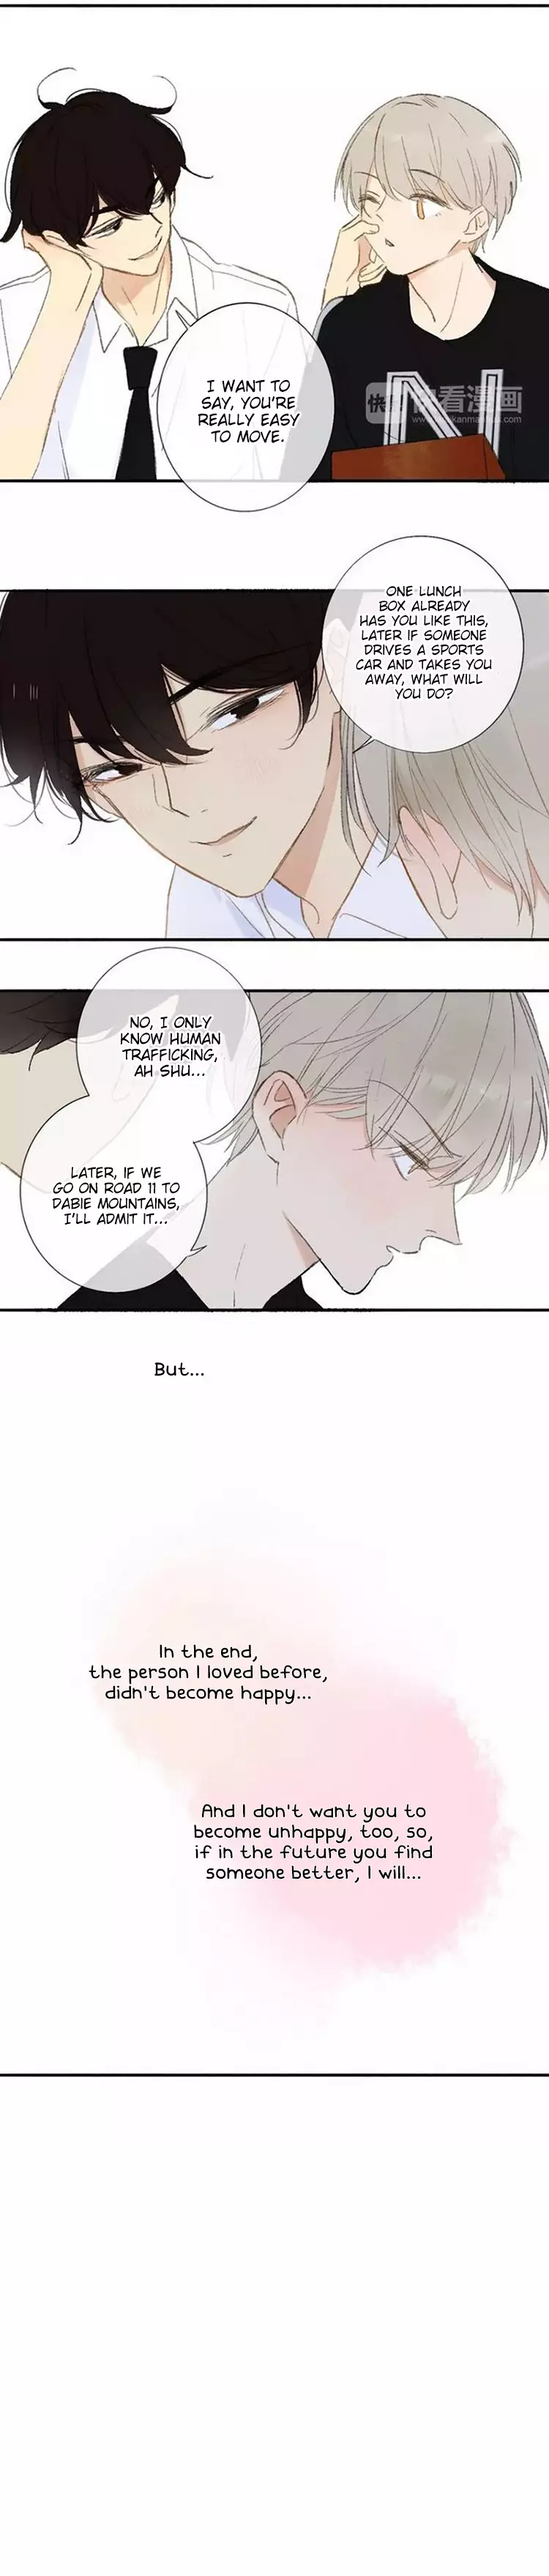 Classmate Relationship? - 115 page 7-392a2b05